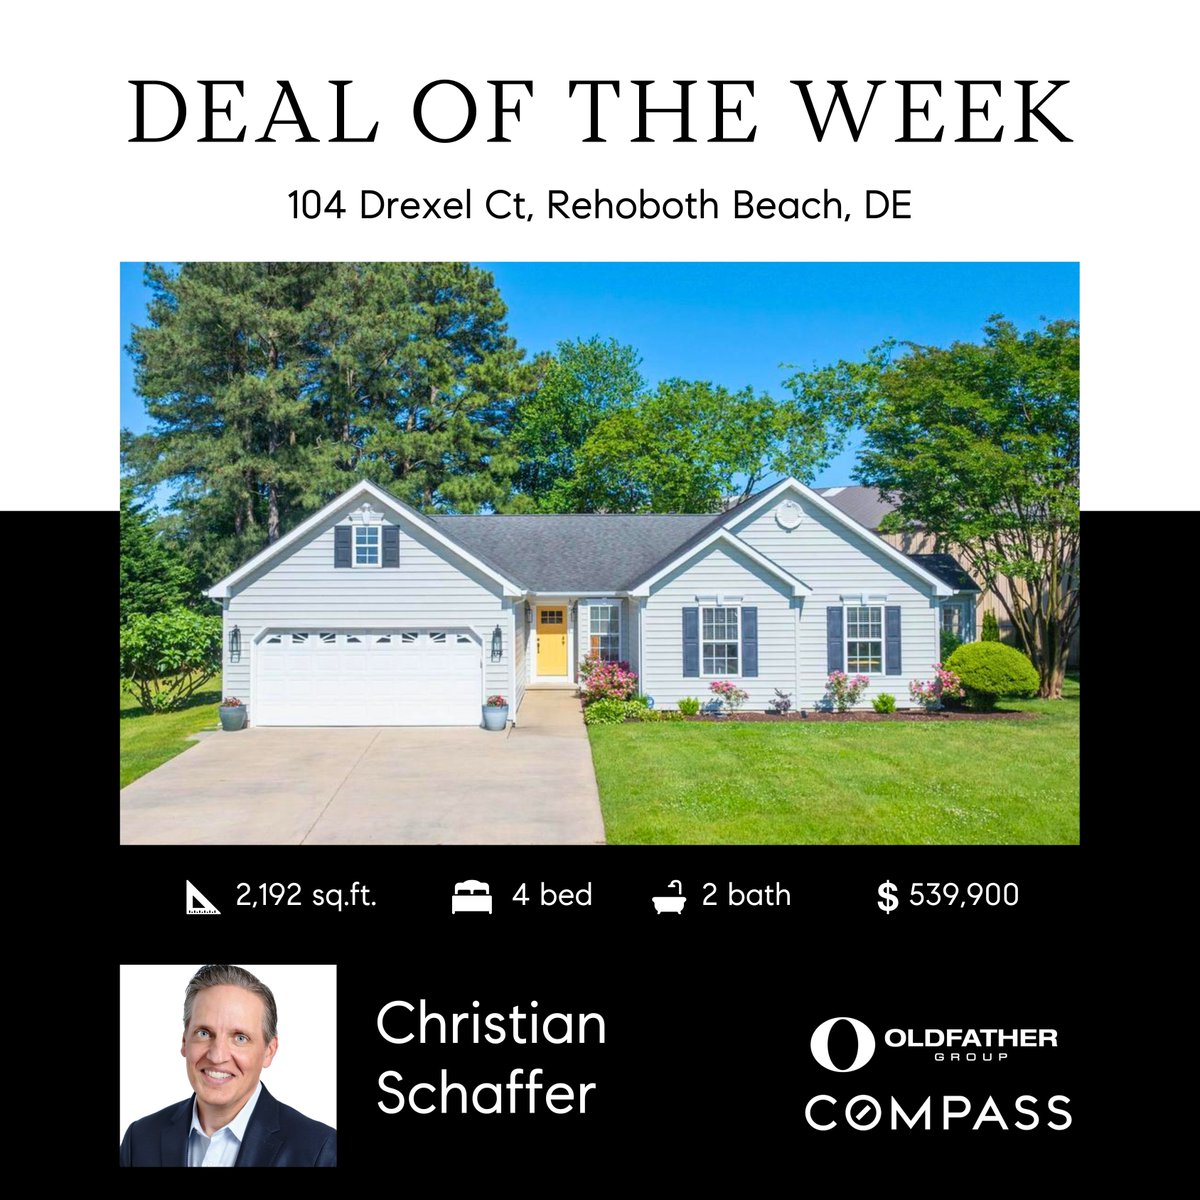 ✨ Deal of the Week Alert! ✨

This one won't last long! Contact Christian TODAY to schedule your private showing! 🔗 bit.ly/104-drexel-ct
​
#realtorlife #homesold #dreamhome #realestate #coastal #delaware #maryland #oldfather #compass